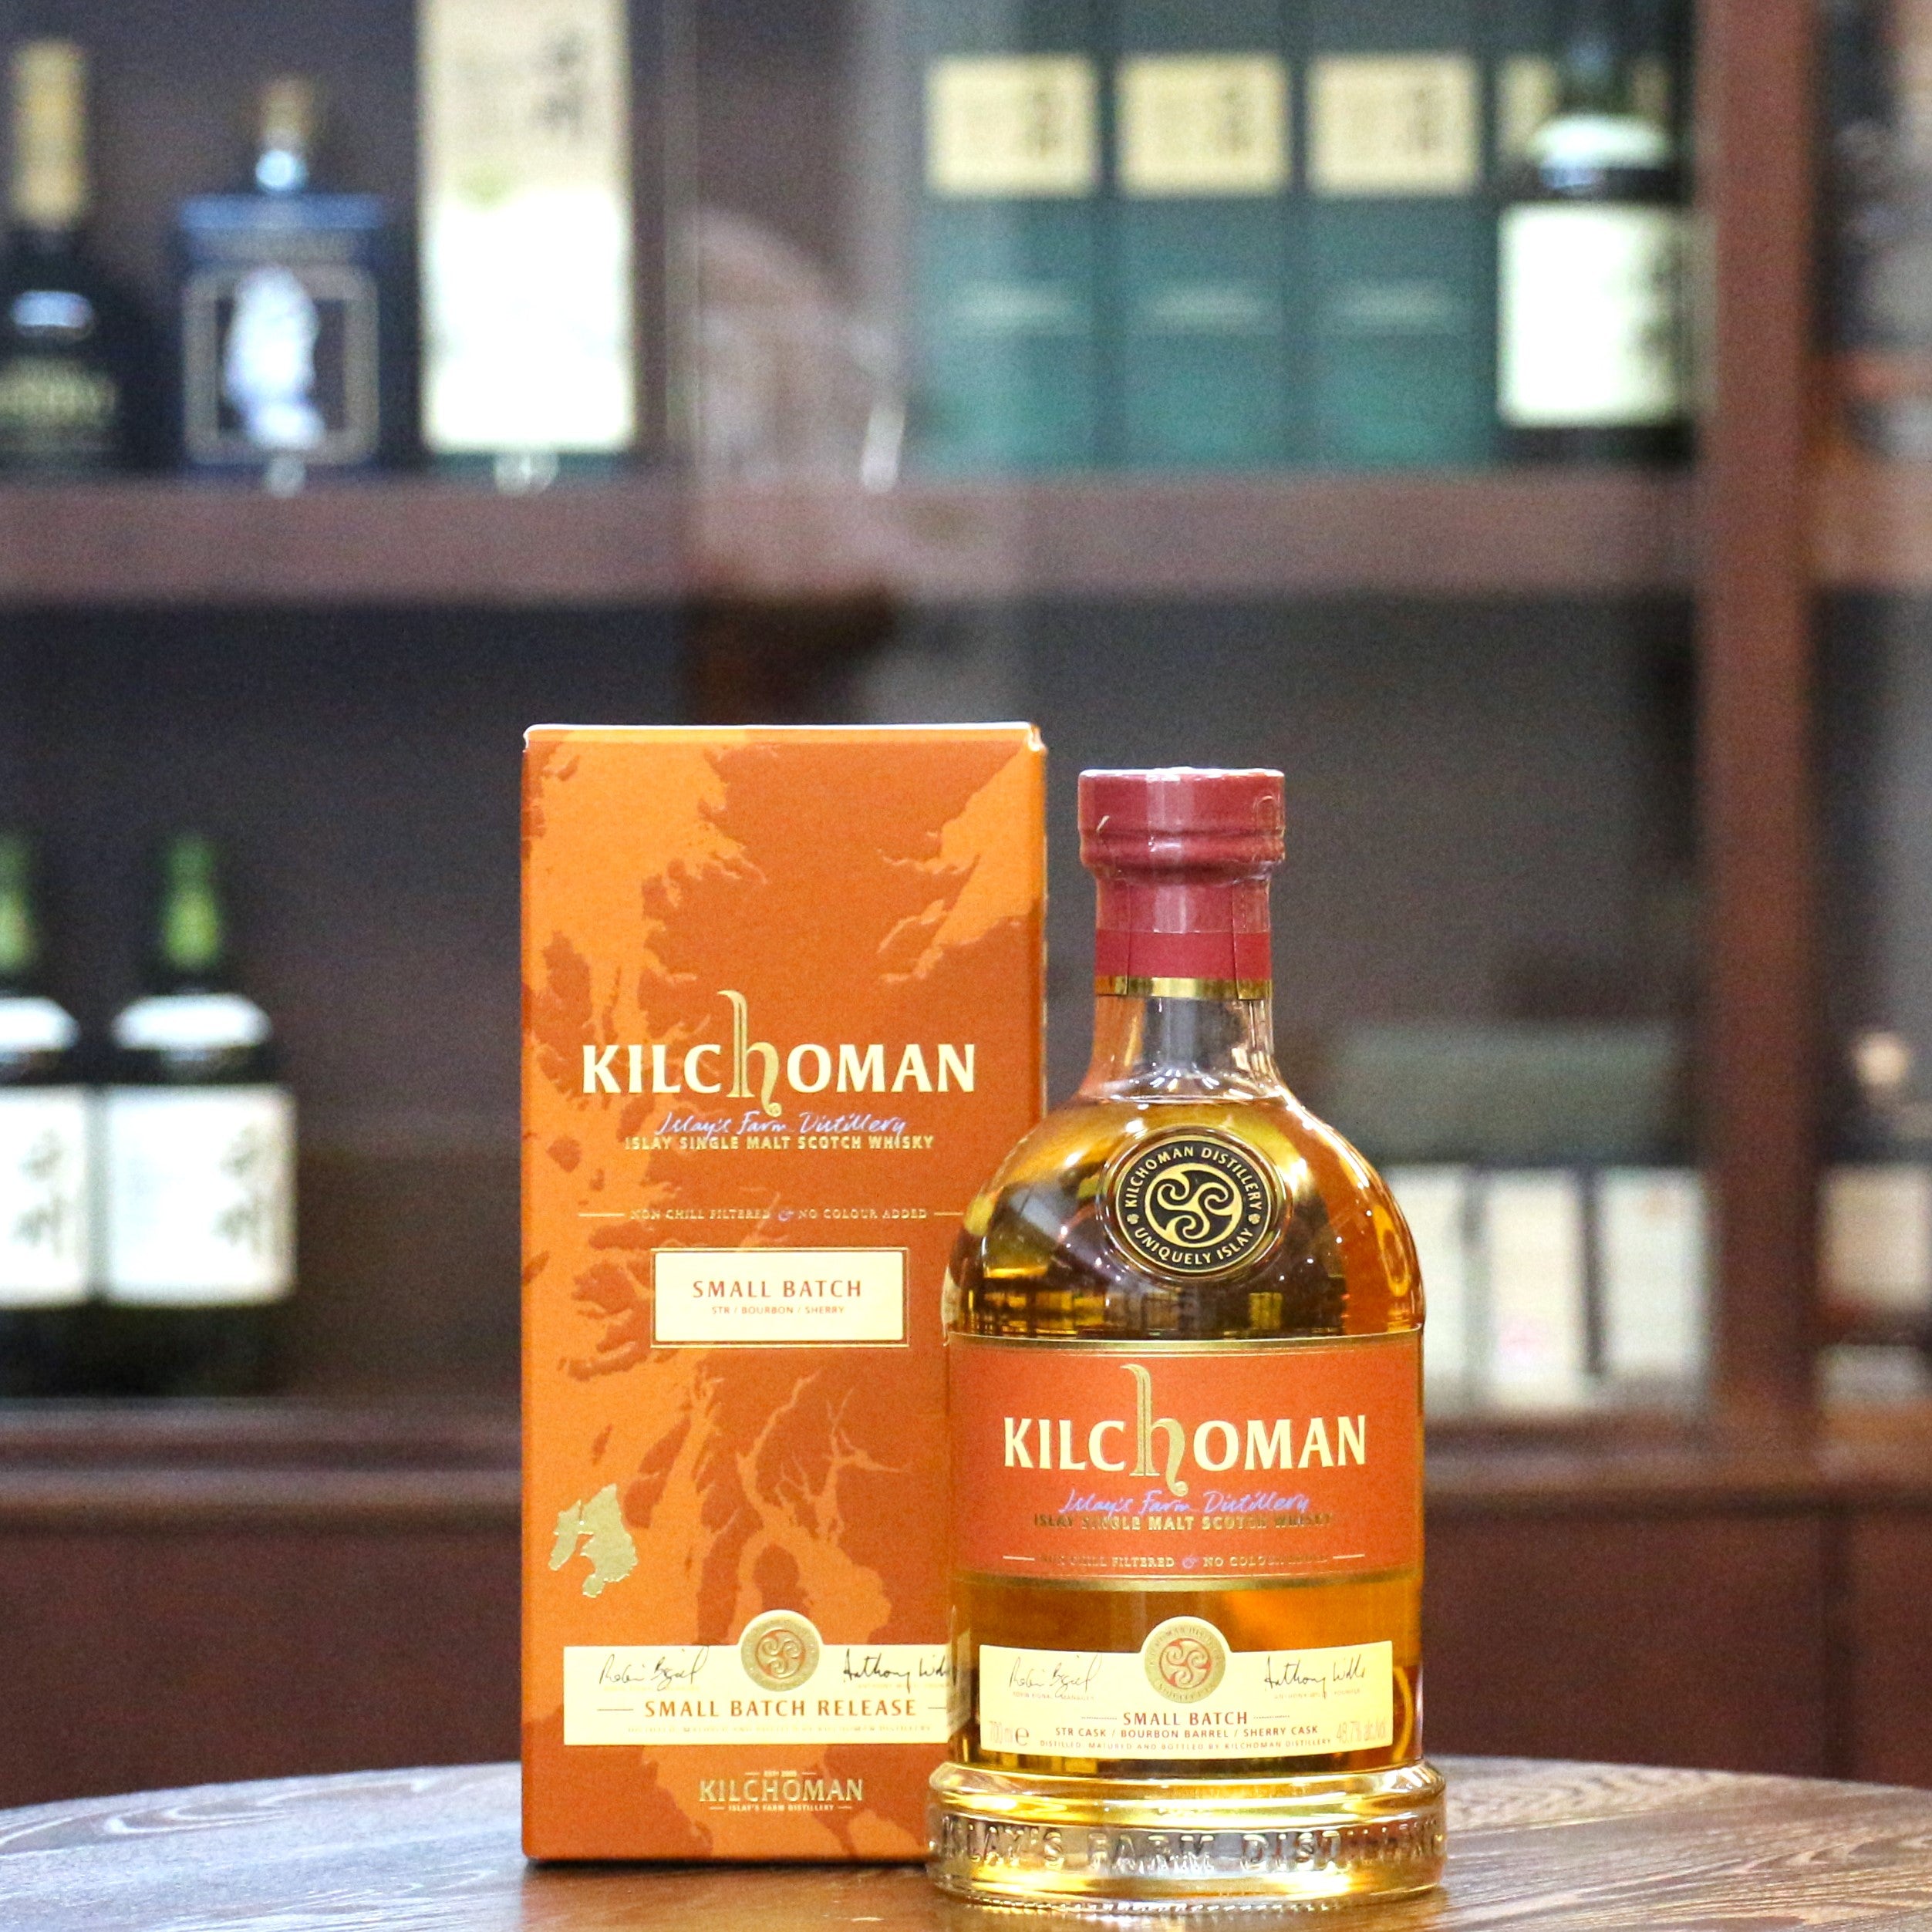 This Small Batch Vatting combines bourbon and oloroso sherry matured Kilchoman at 46% ABV with specially selected Shaved Toasted & Re-charred (STR) Red Wine casks, at natural cask strength.